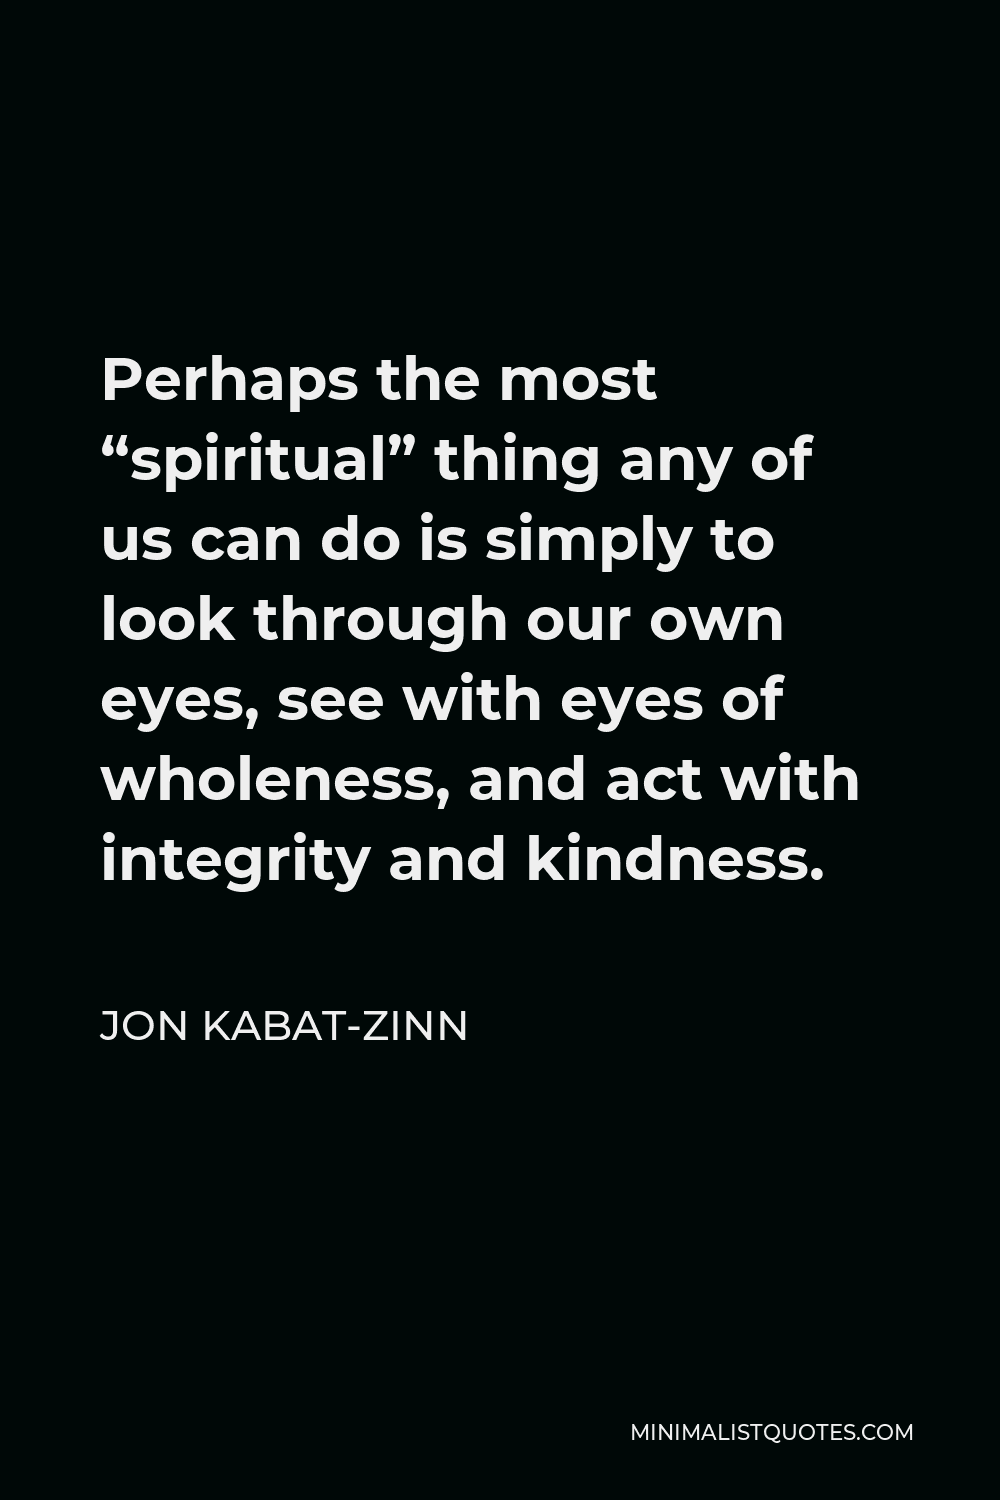 Jon Kabat-Zinn Quote - Perhaps the most “spiritual” thing any of us can do is simply to look through our own eyes, see with eyes of wholeness, and act with integrity and kindness.